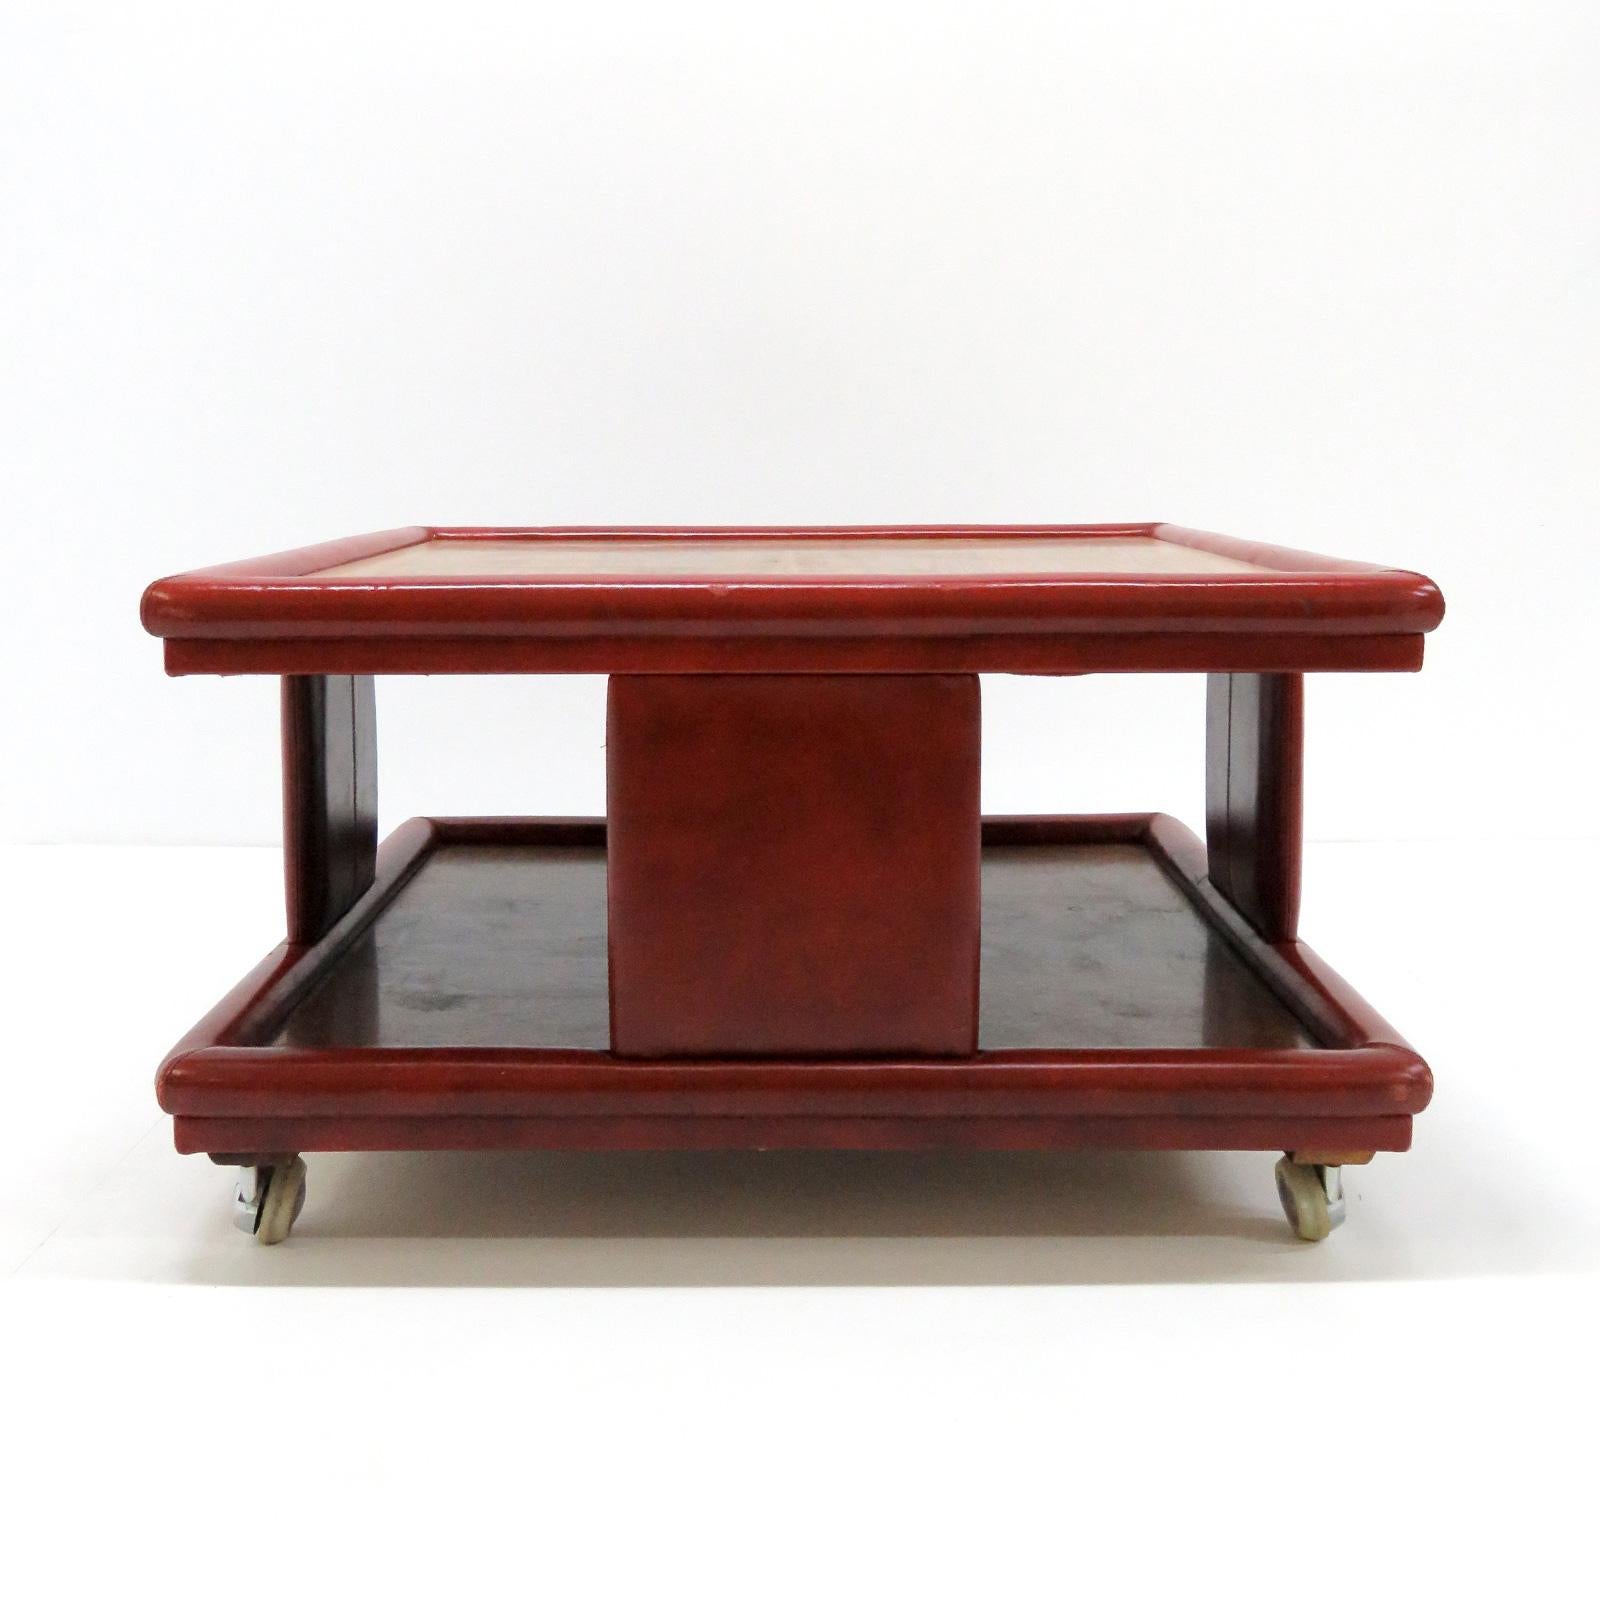 Wonderful red leather and wood two-tier coffee table from Italy, 1970, attributed to Poltrona Frau. One dark one light wood top, great patinaed leather cladding on detachable casters.
  